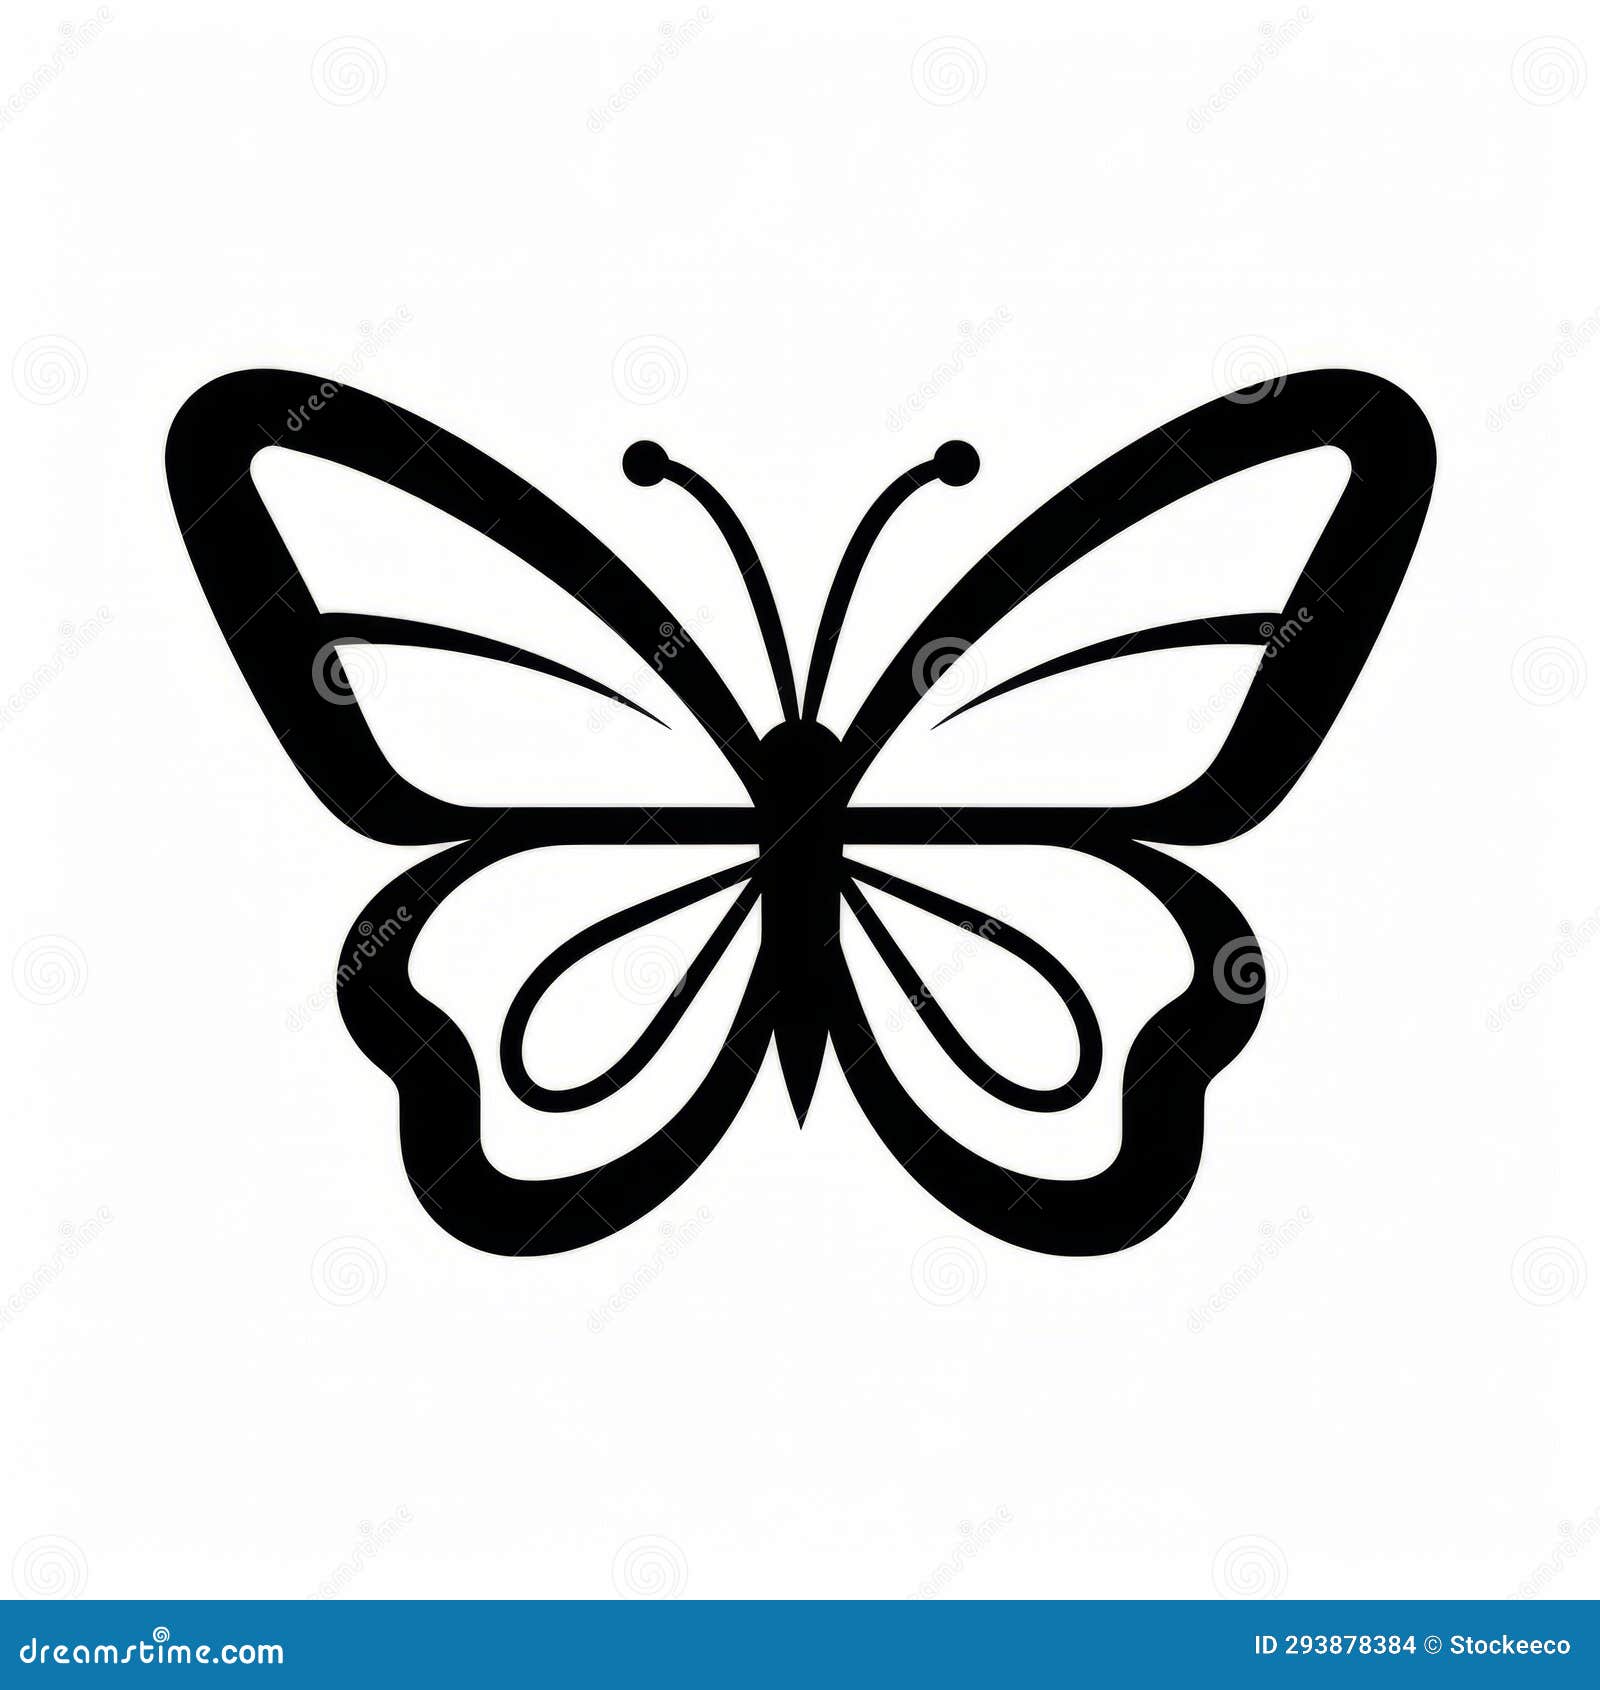 simple butterfly silhouette  - flickr style art